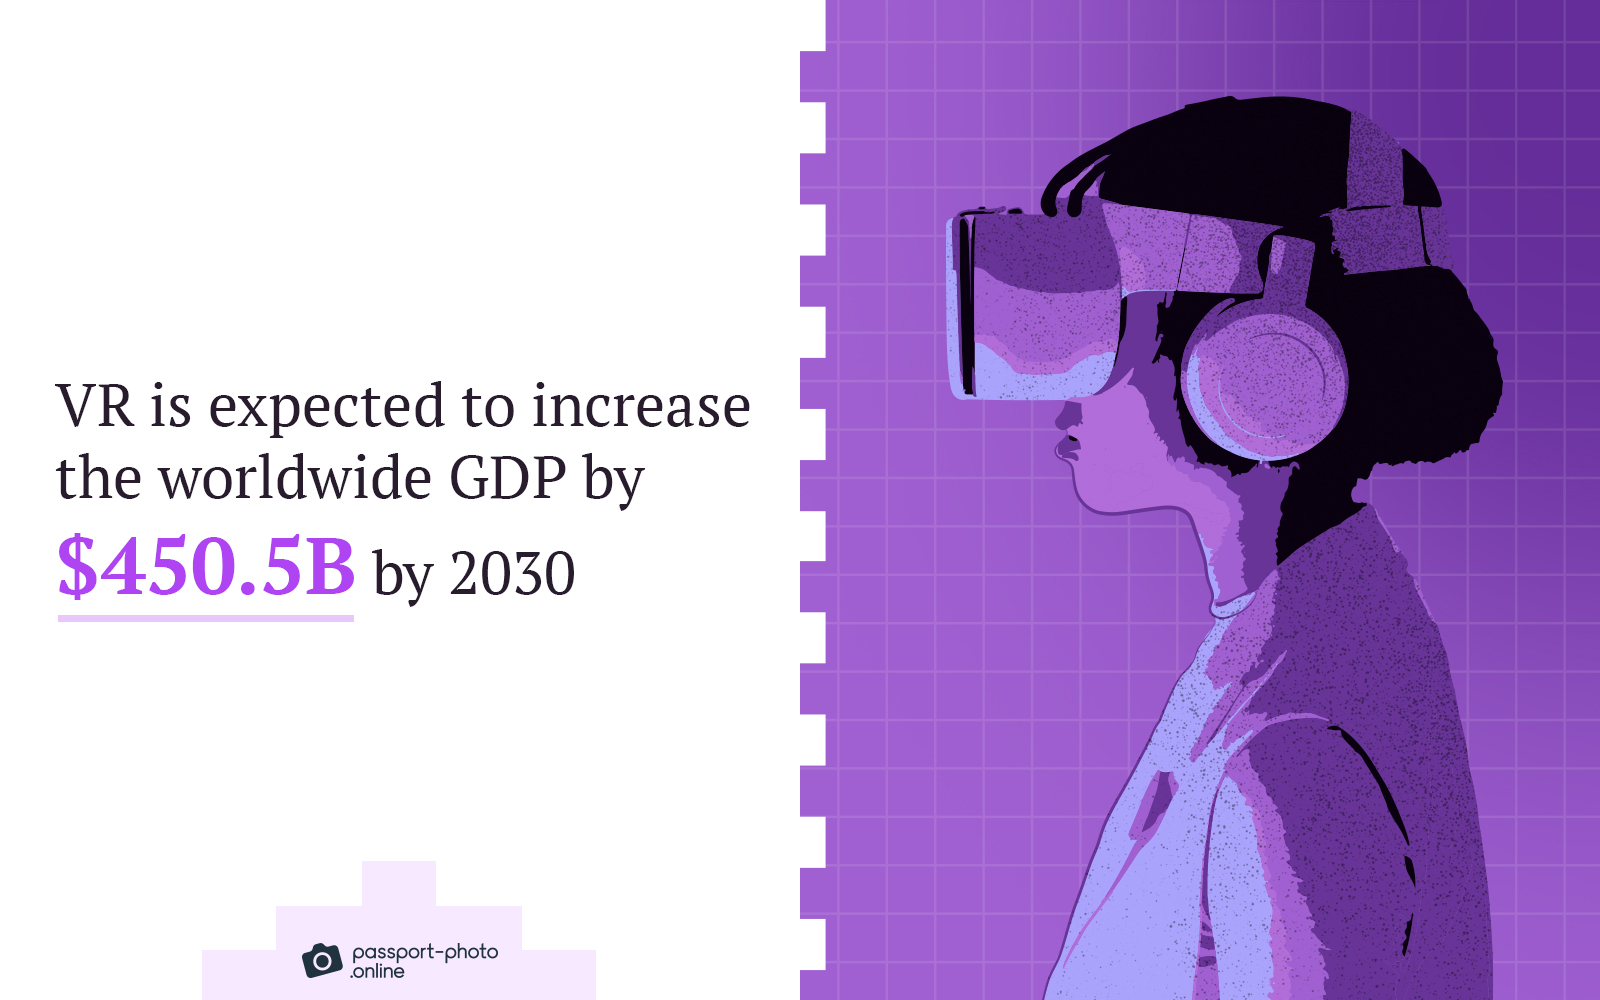 VR is expected to increase the worldwide GDP by $450.5B by 2030